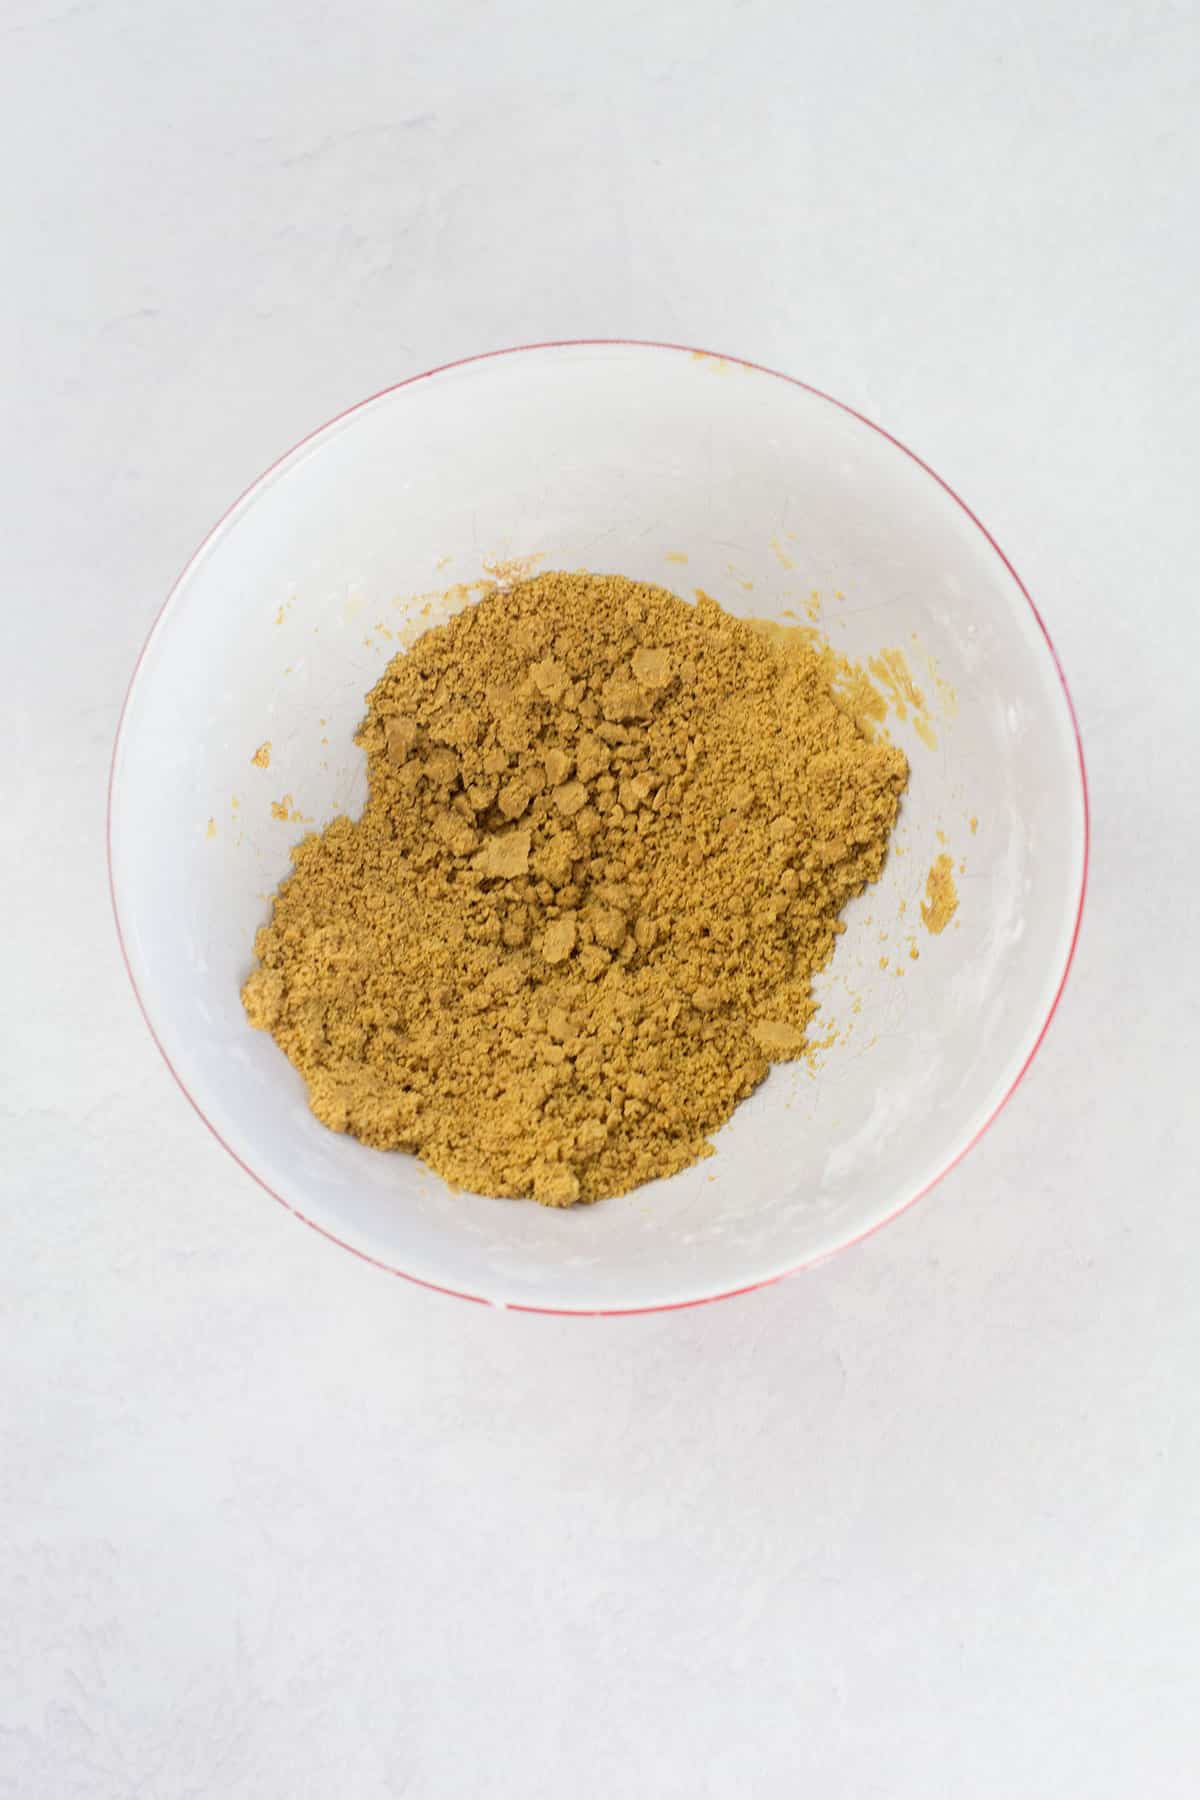 Crumbly mixture in bowl.